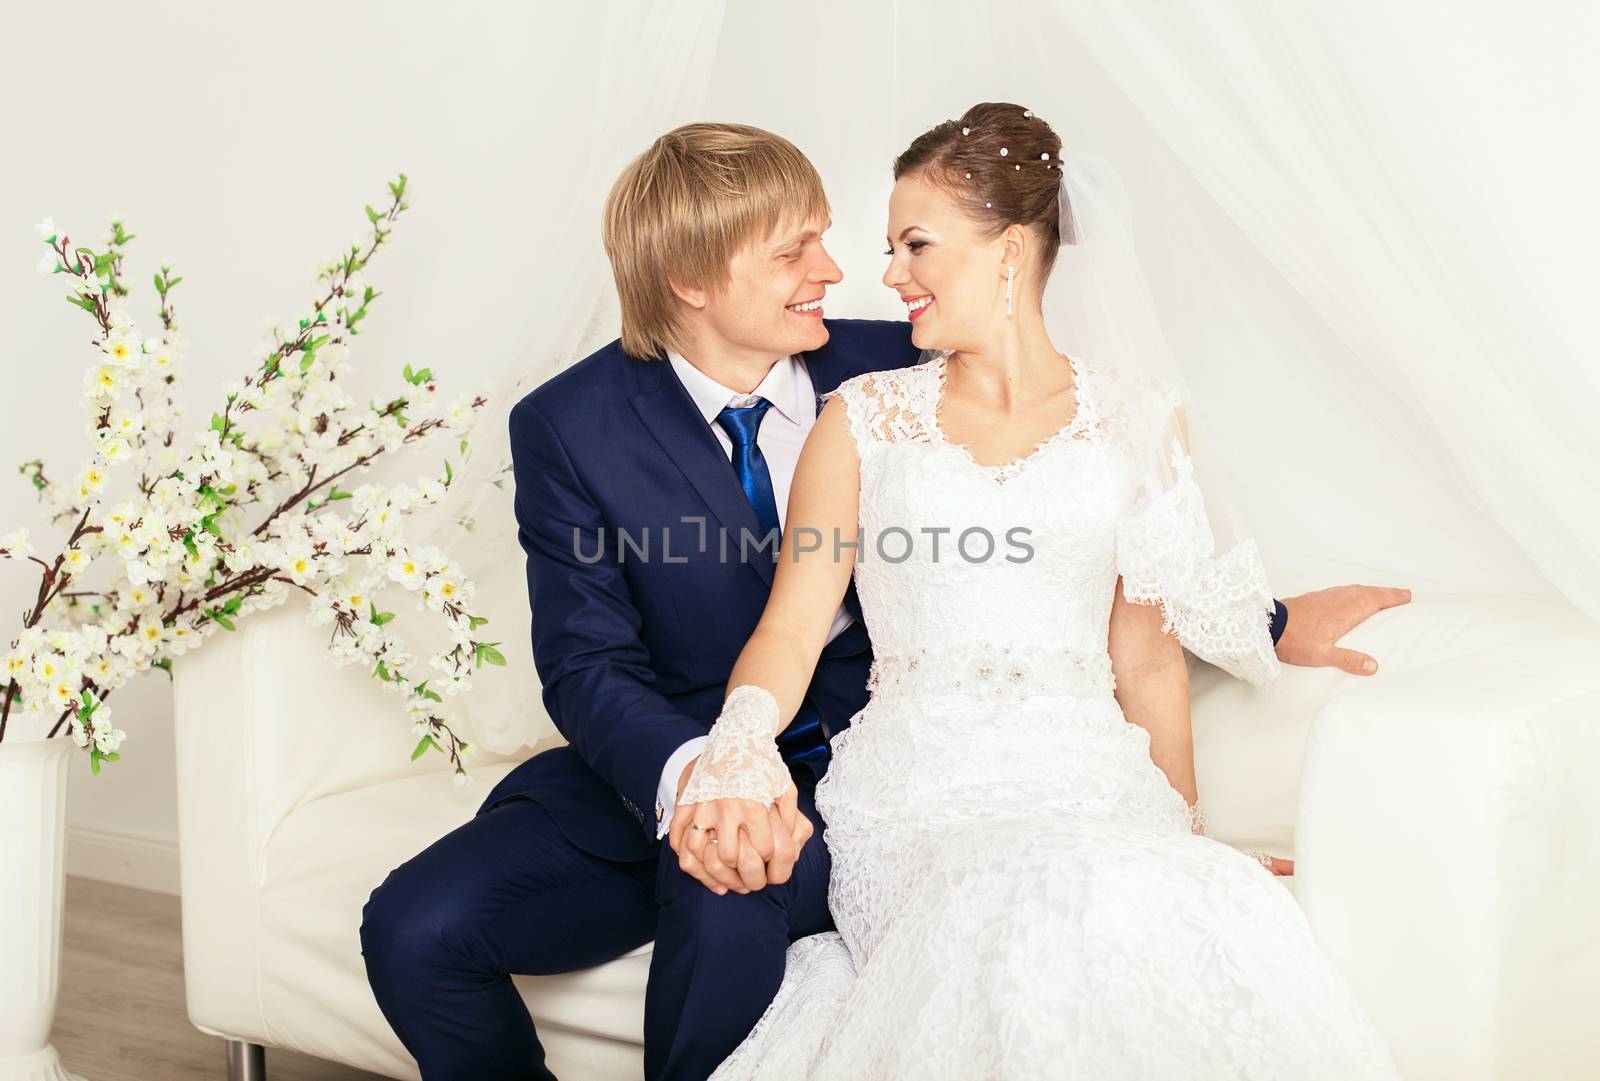 Laughing couple. Wedding photo shoot in the total white studio